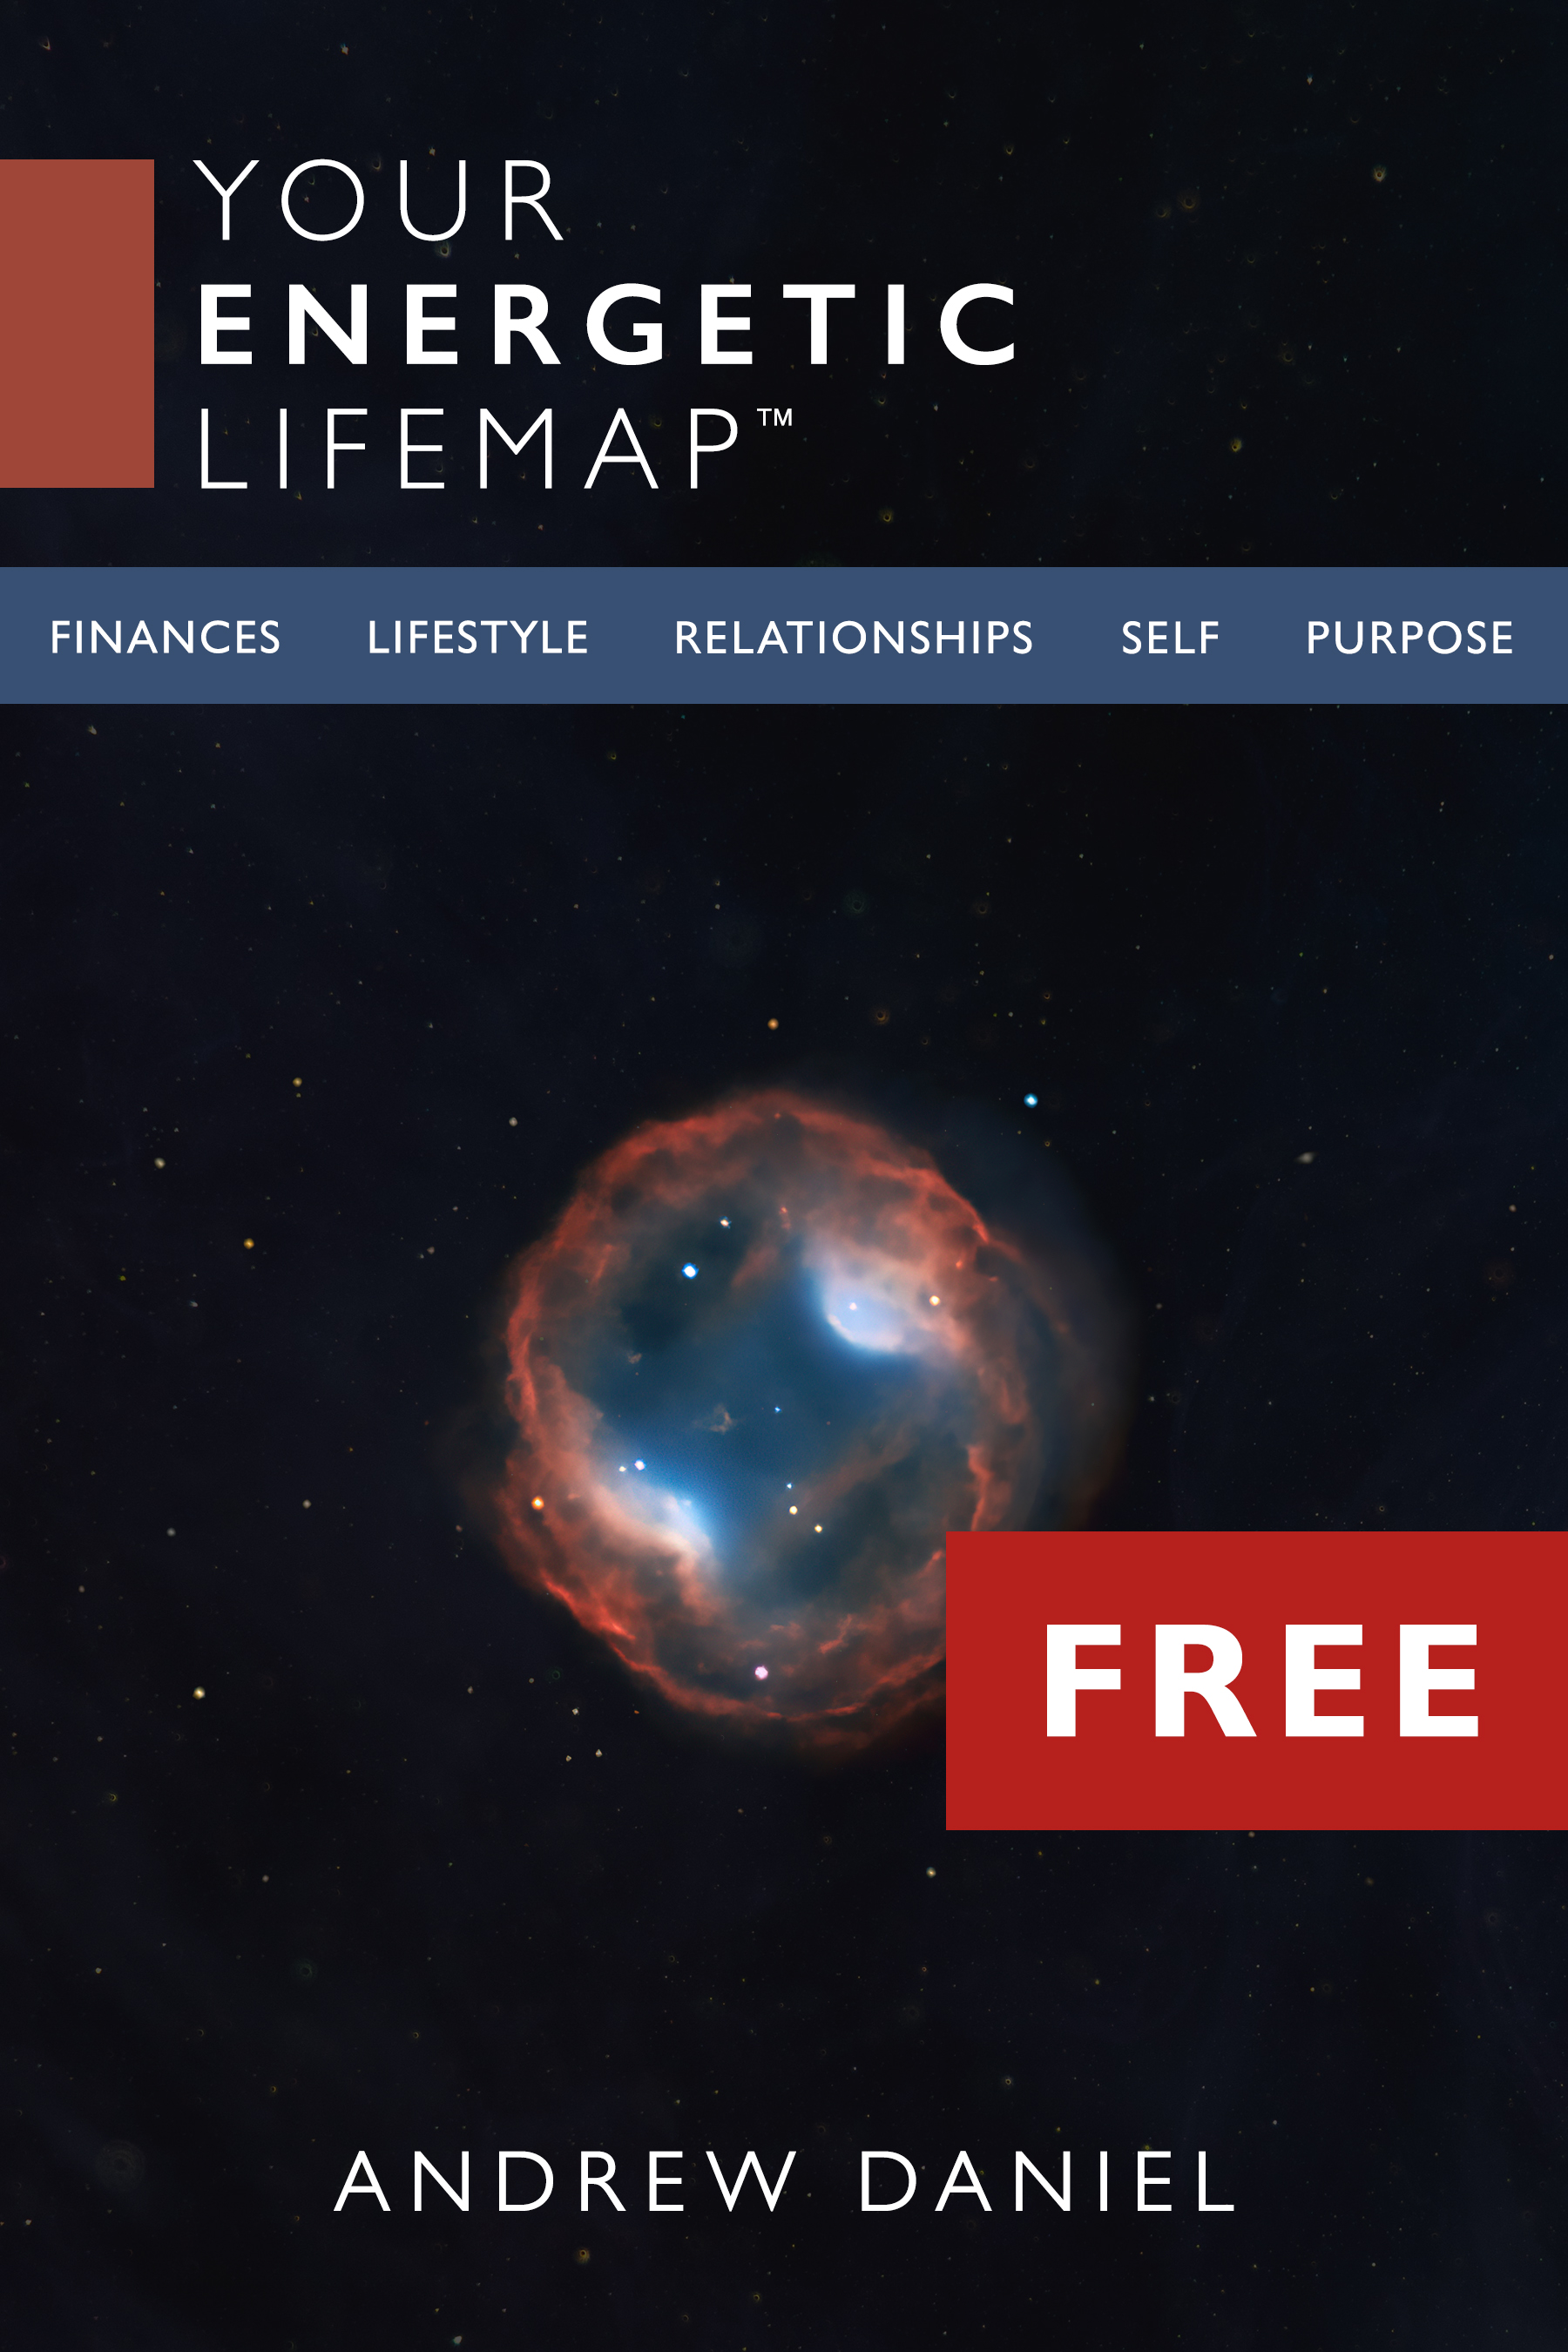 Download Your Energetic Lifemap for Free